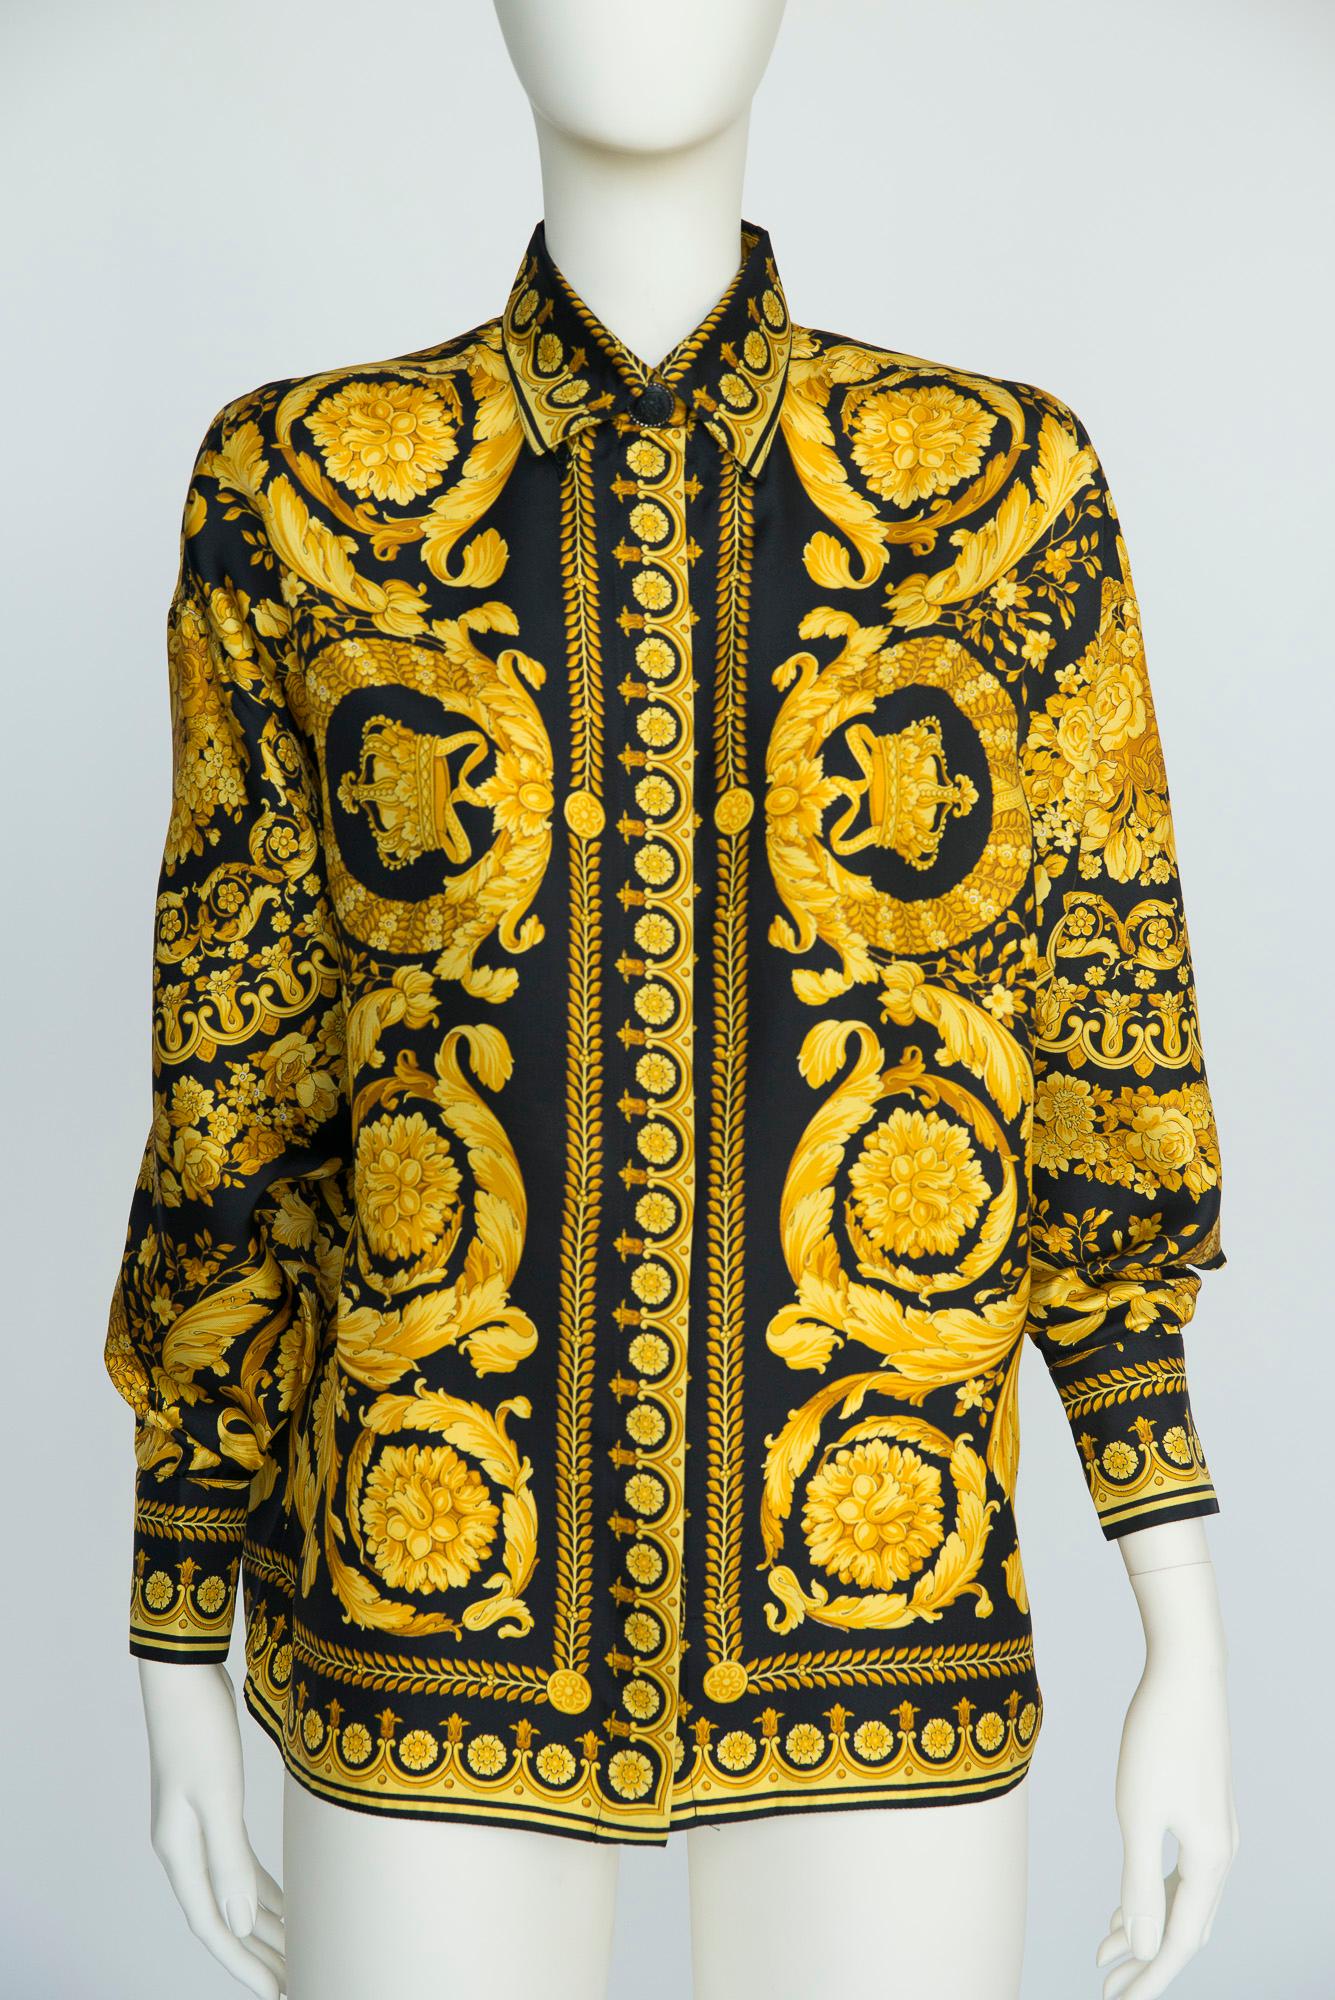 Just one glimpse at this shirt and you'll know it's Versace !
The 